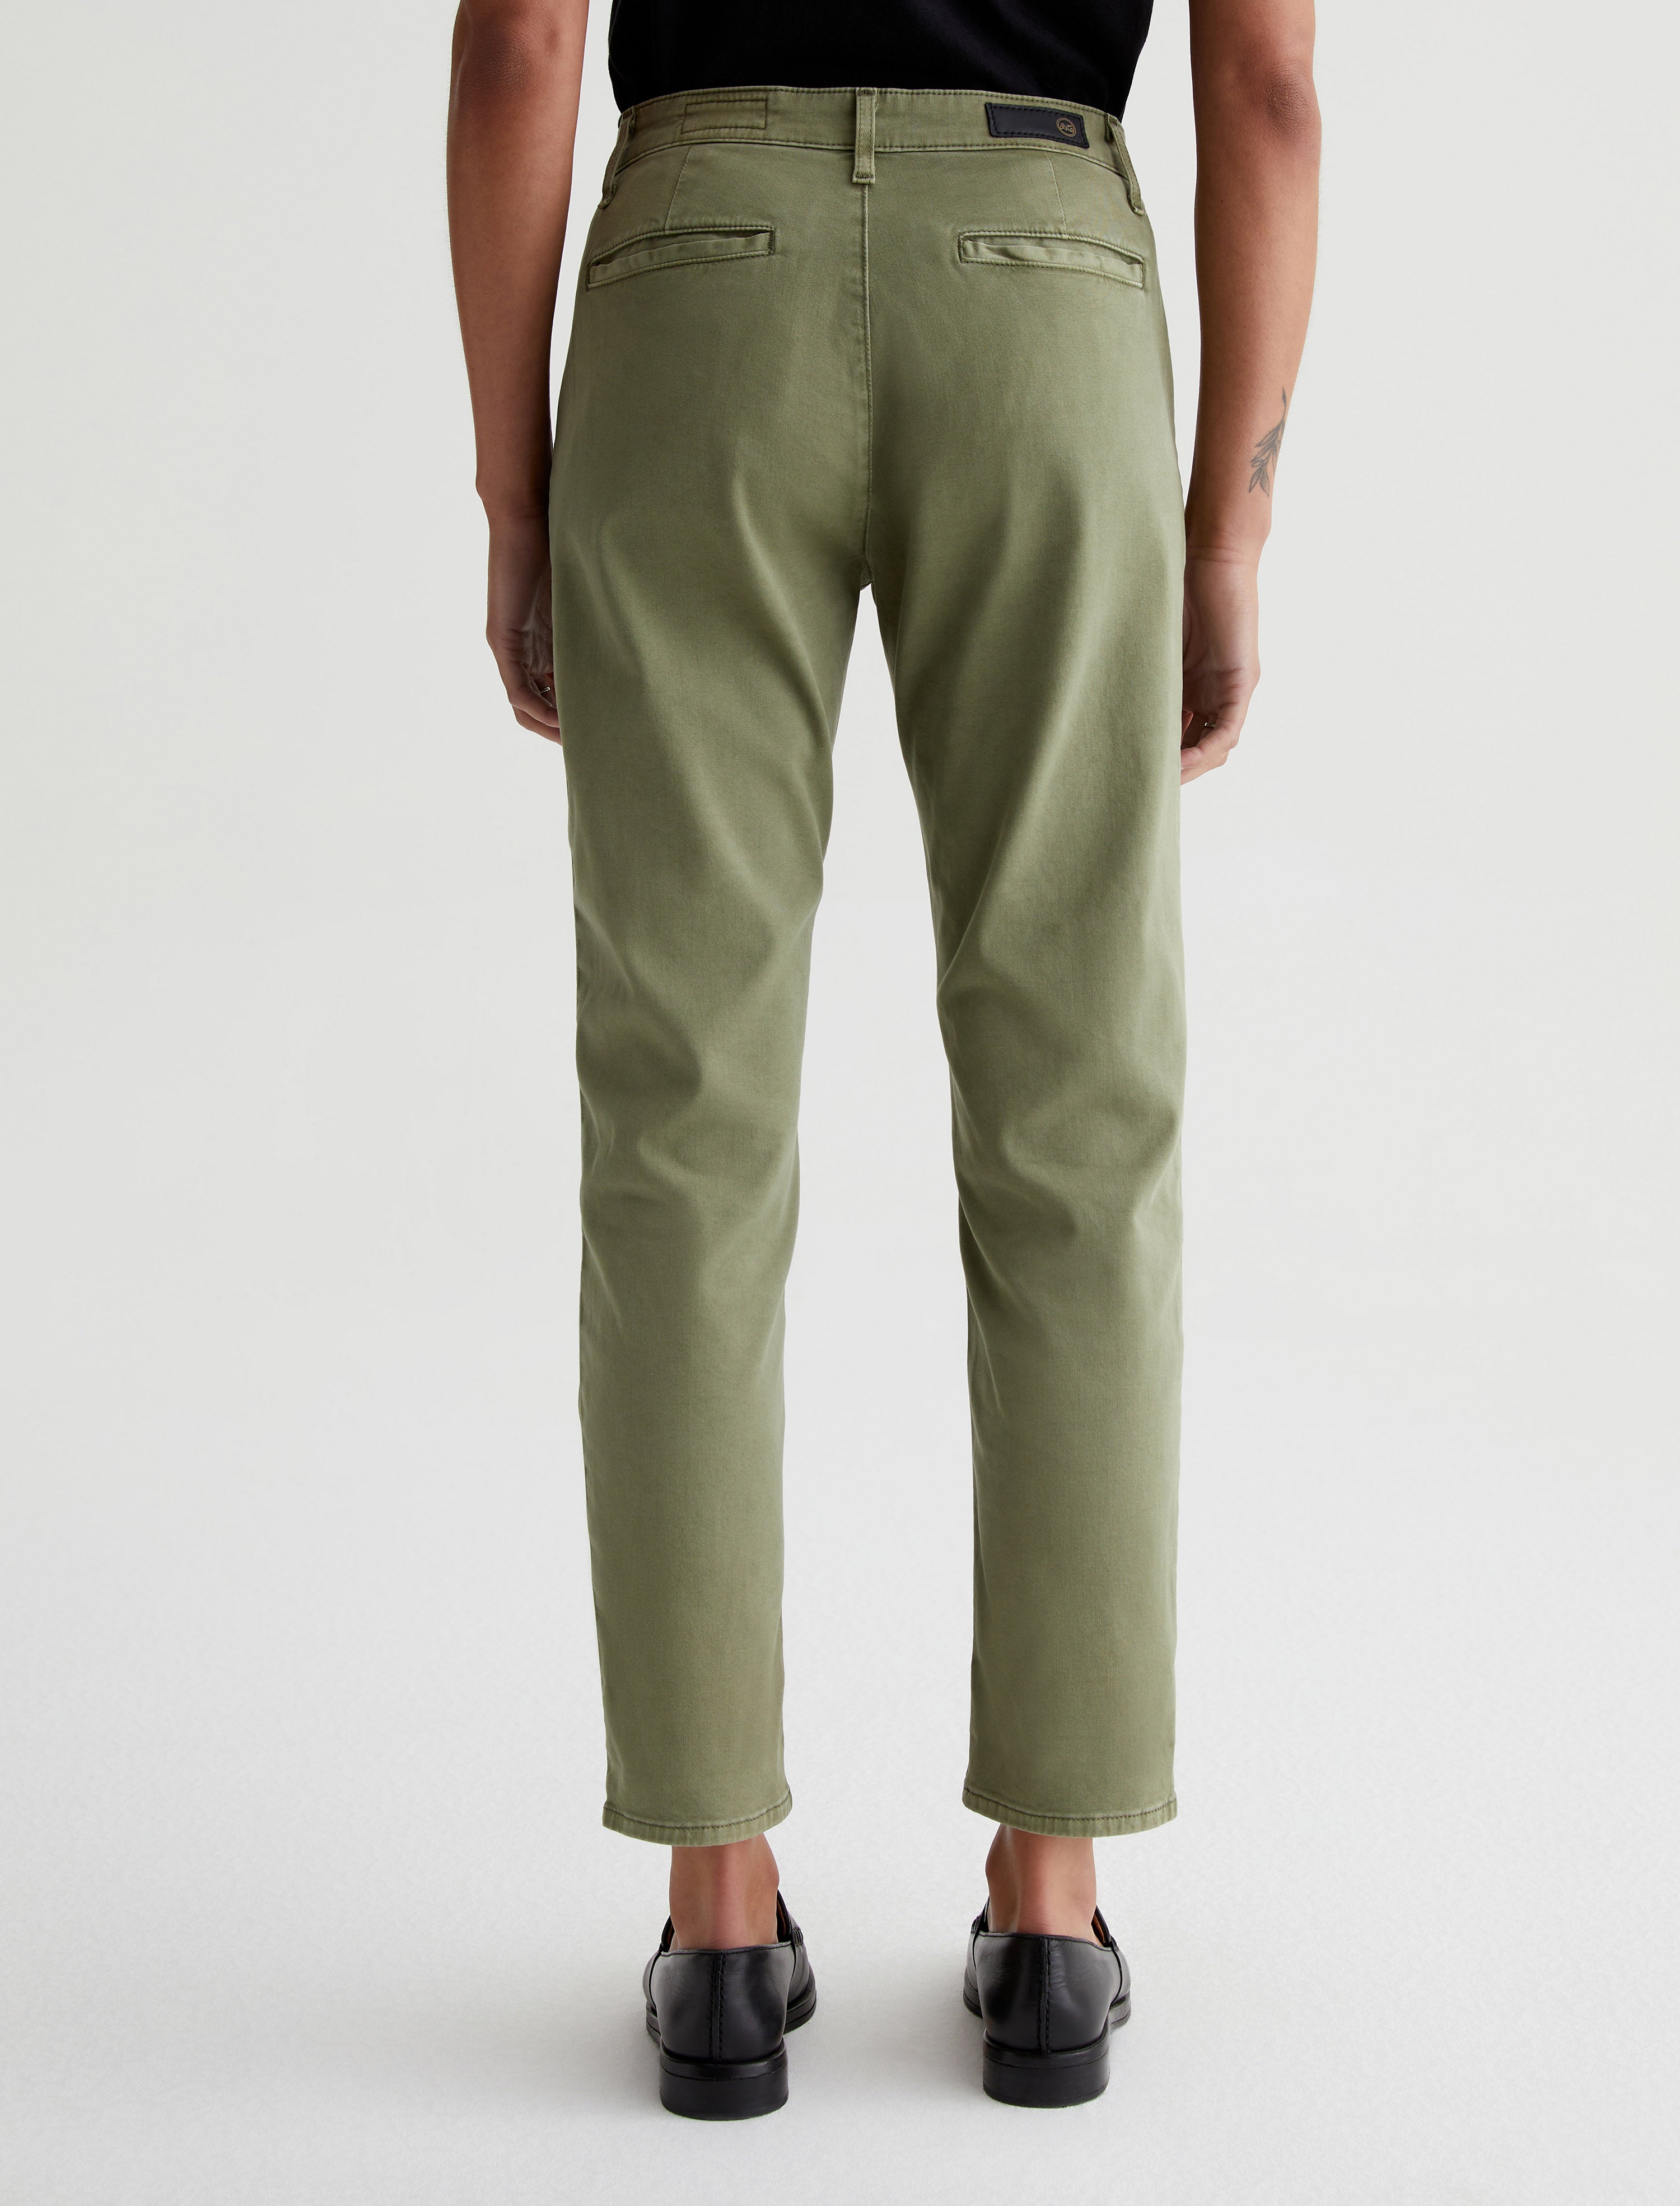 Theory Double Stretch Tailored Trouser Pants in Deep Royal. Size 00, NWT  $335!! | eBay